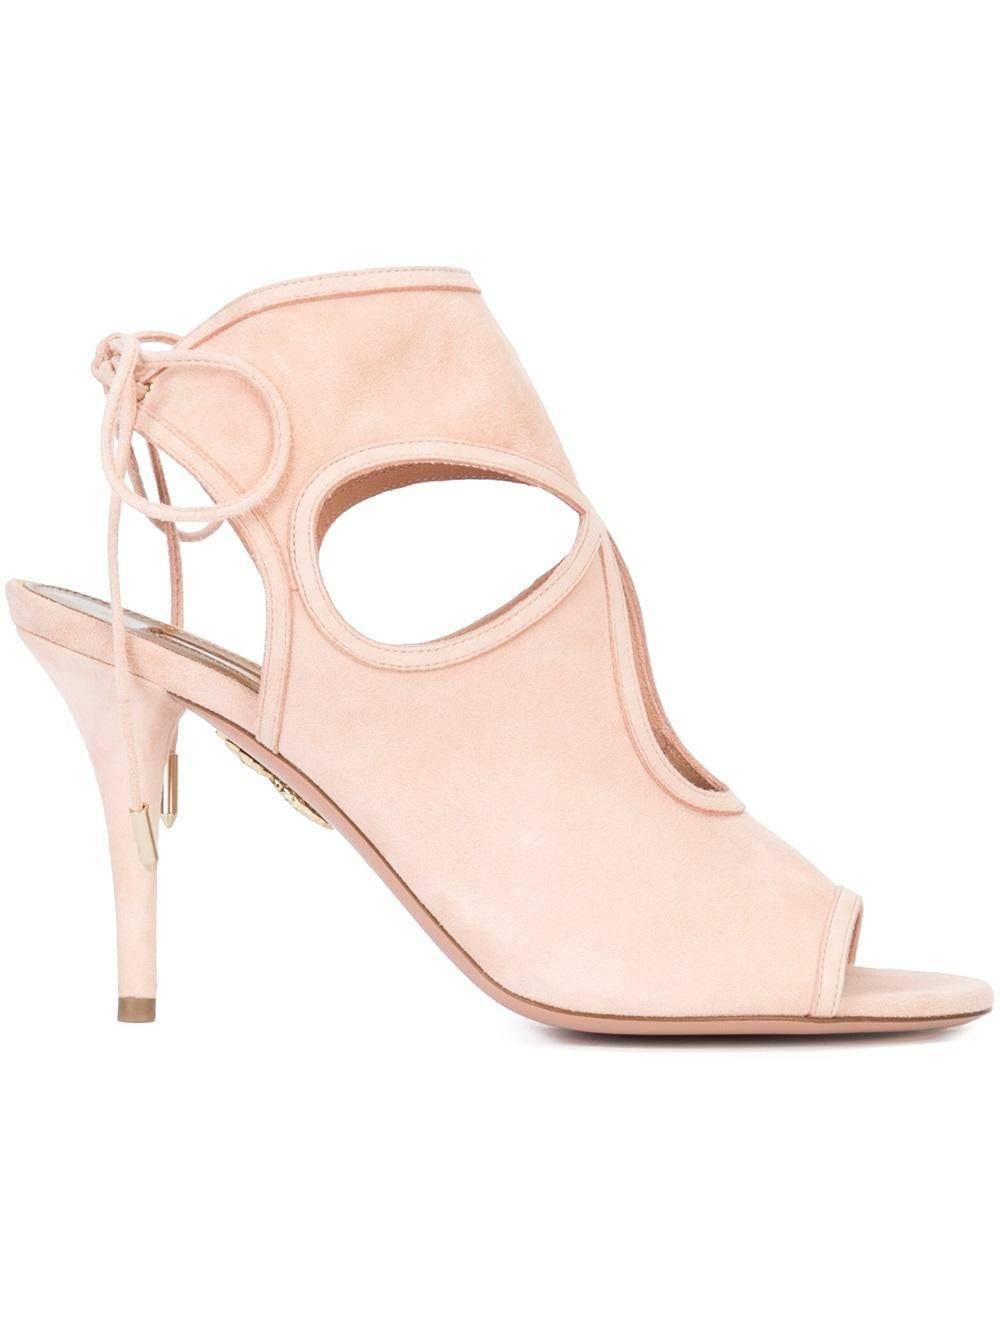 White Aquazzura New Sold Out Pink Cashmere Suede Cut Out Sandals Heels in Box